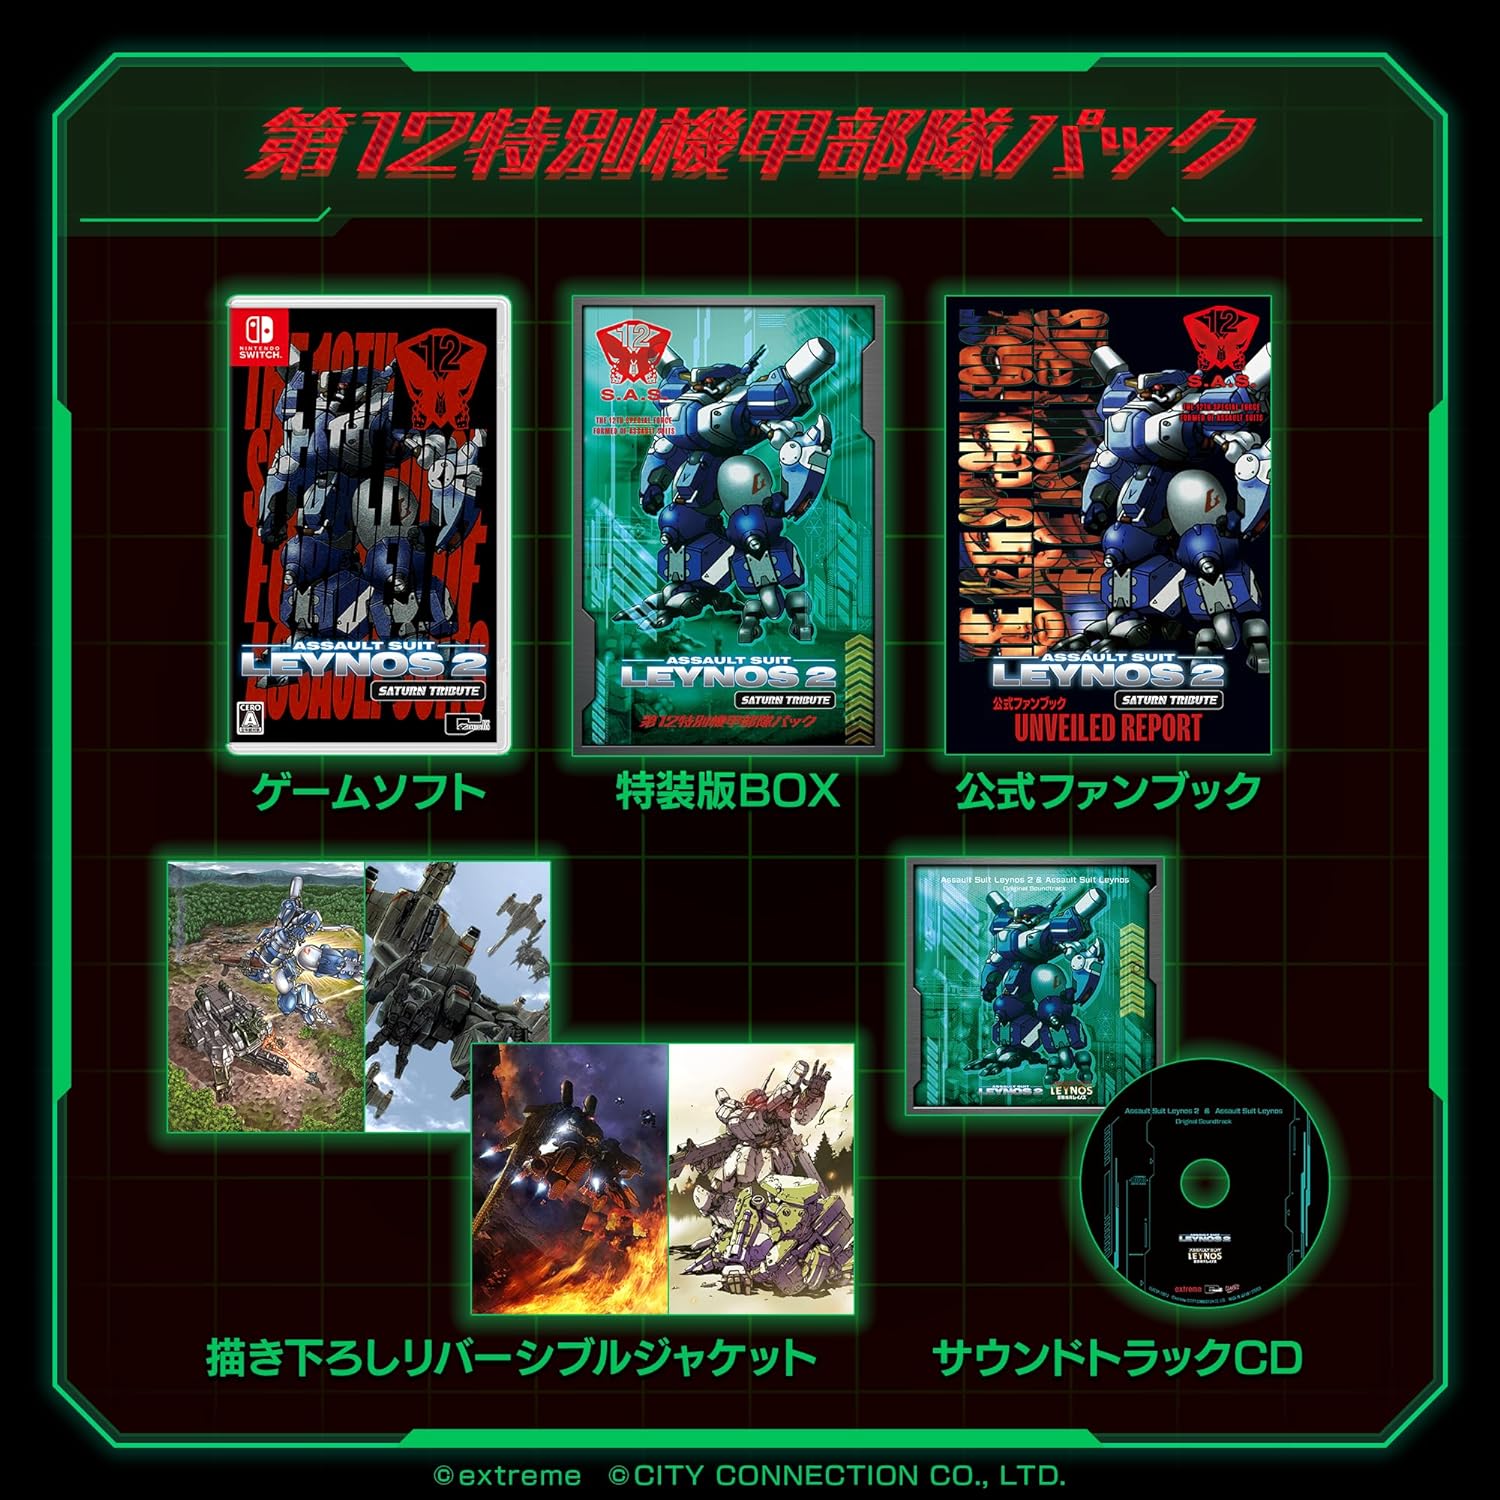 ASSAULT SUIT LEYNOS 2 SATURN TRIBUTE DELUXE EDITION 12TH SPECIAL ARMORED UNIT PACK - SWITCH